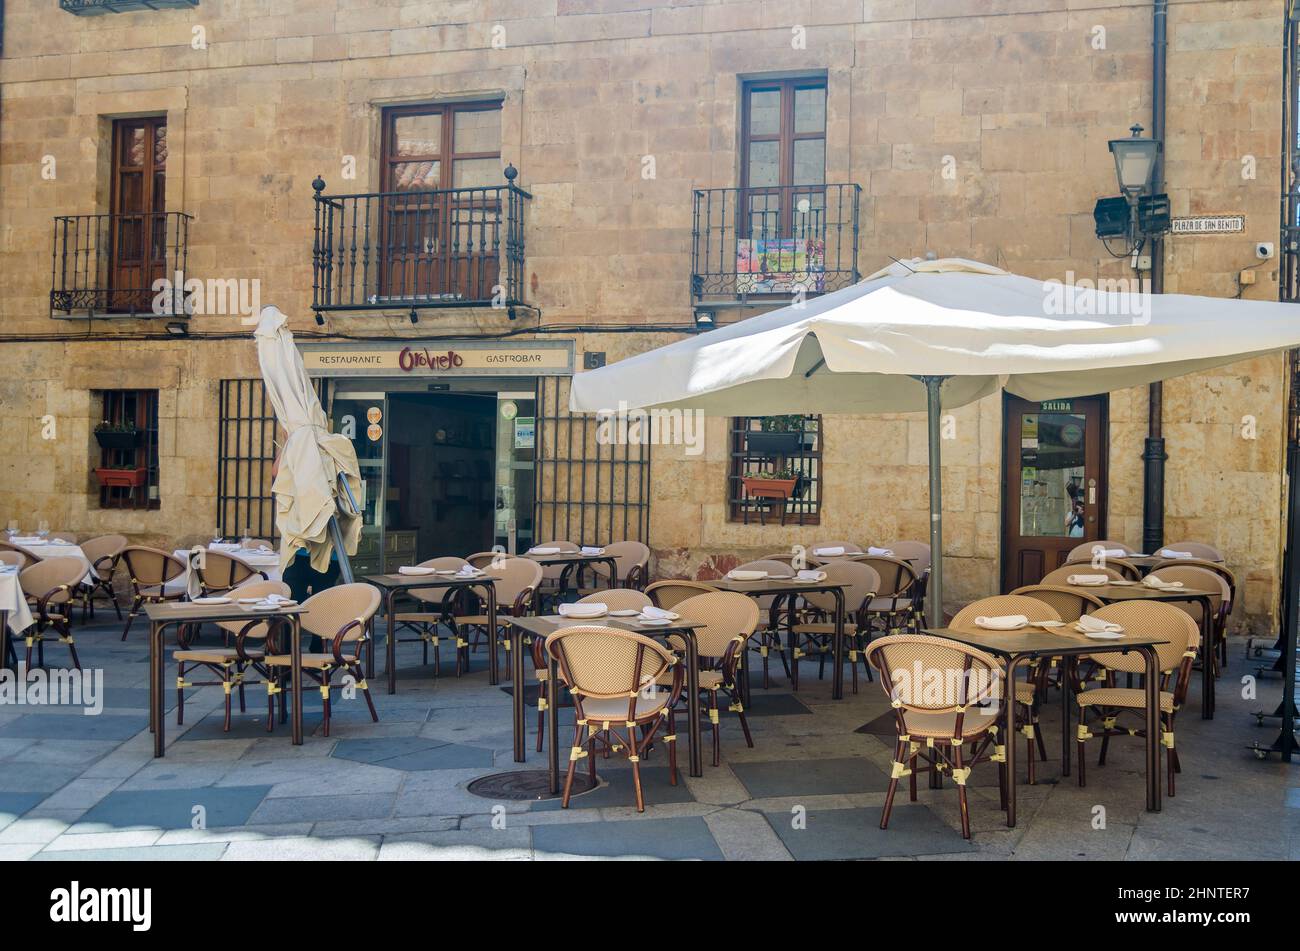 SALAMANCA, SPAIN - AUGUST 22, 2021: A restaurant in the old town of Salamanca, Castile and Leon, Spain Stock Photo